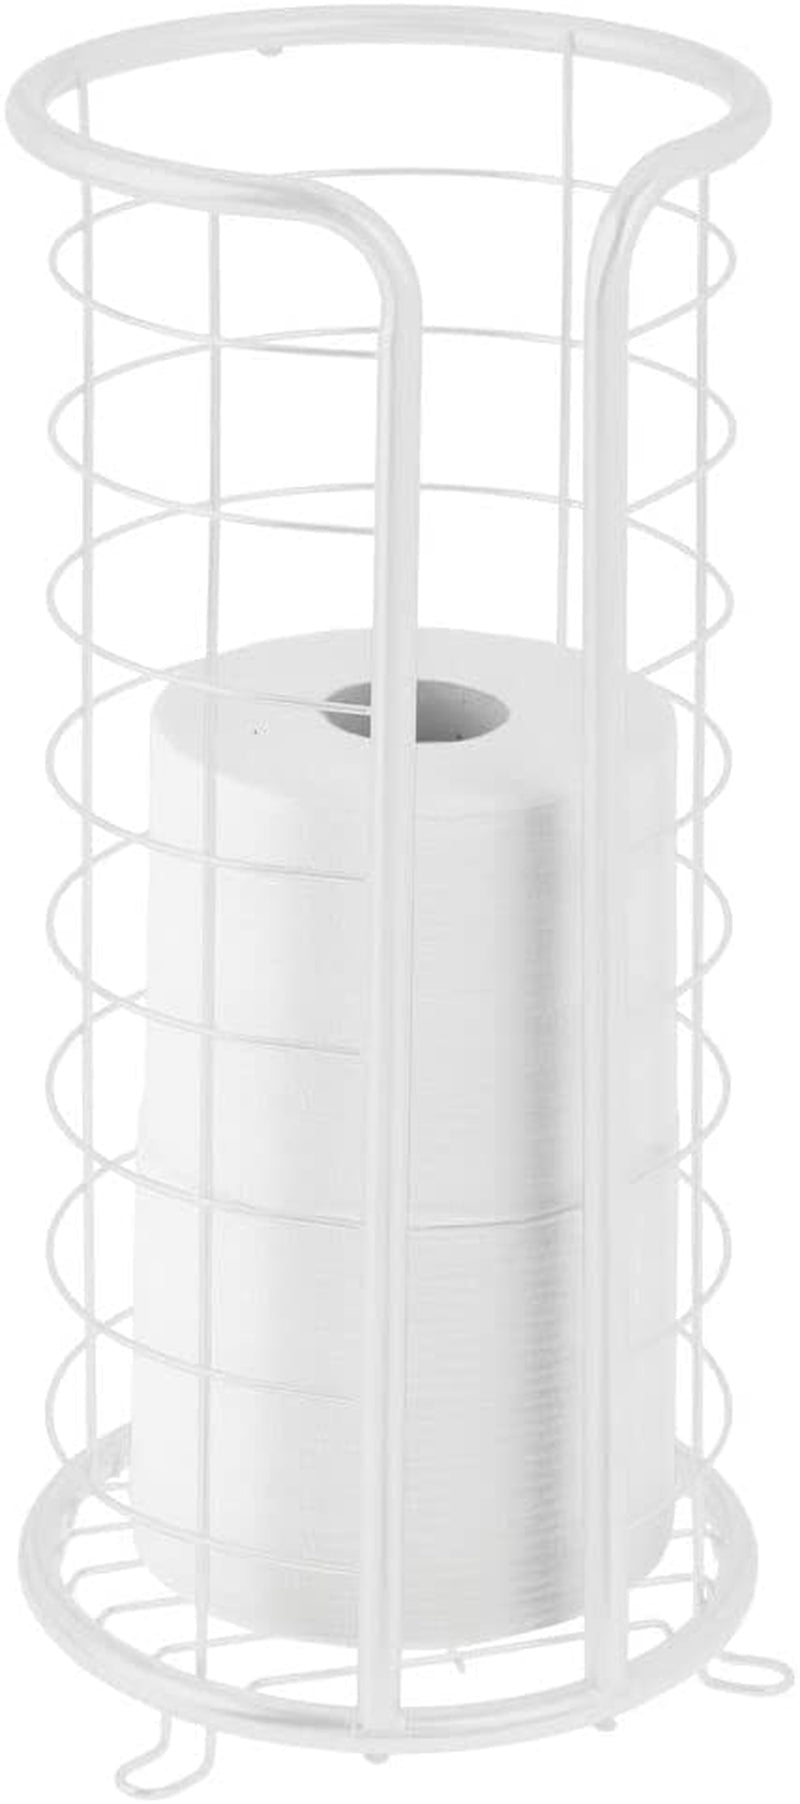 mDesign, Mdesign Decorative Metal Free Standing Toilet Paper Holder Stand with Storage for 3 Rolls of Toilet Tissue - for Bathroom/Powder Room - Holds Mega Rolls - Light Gray